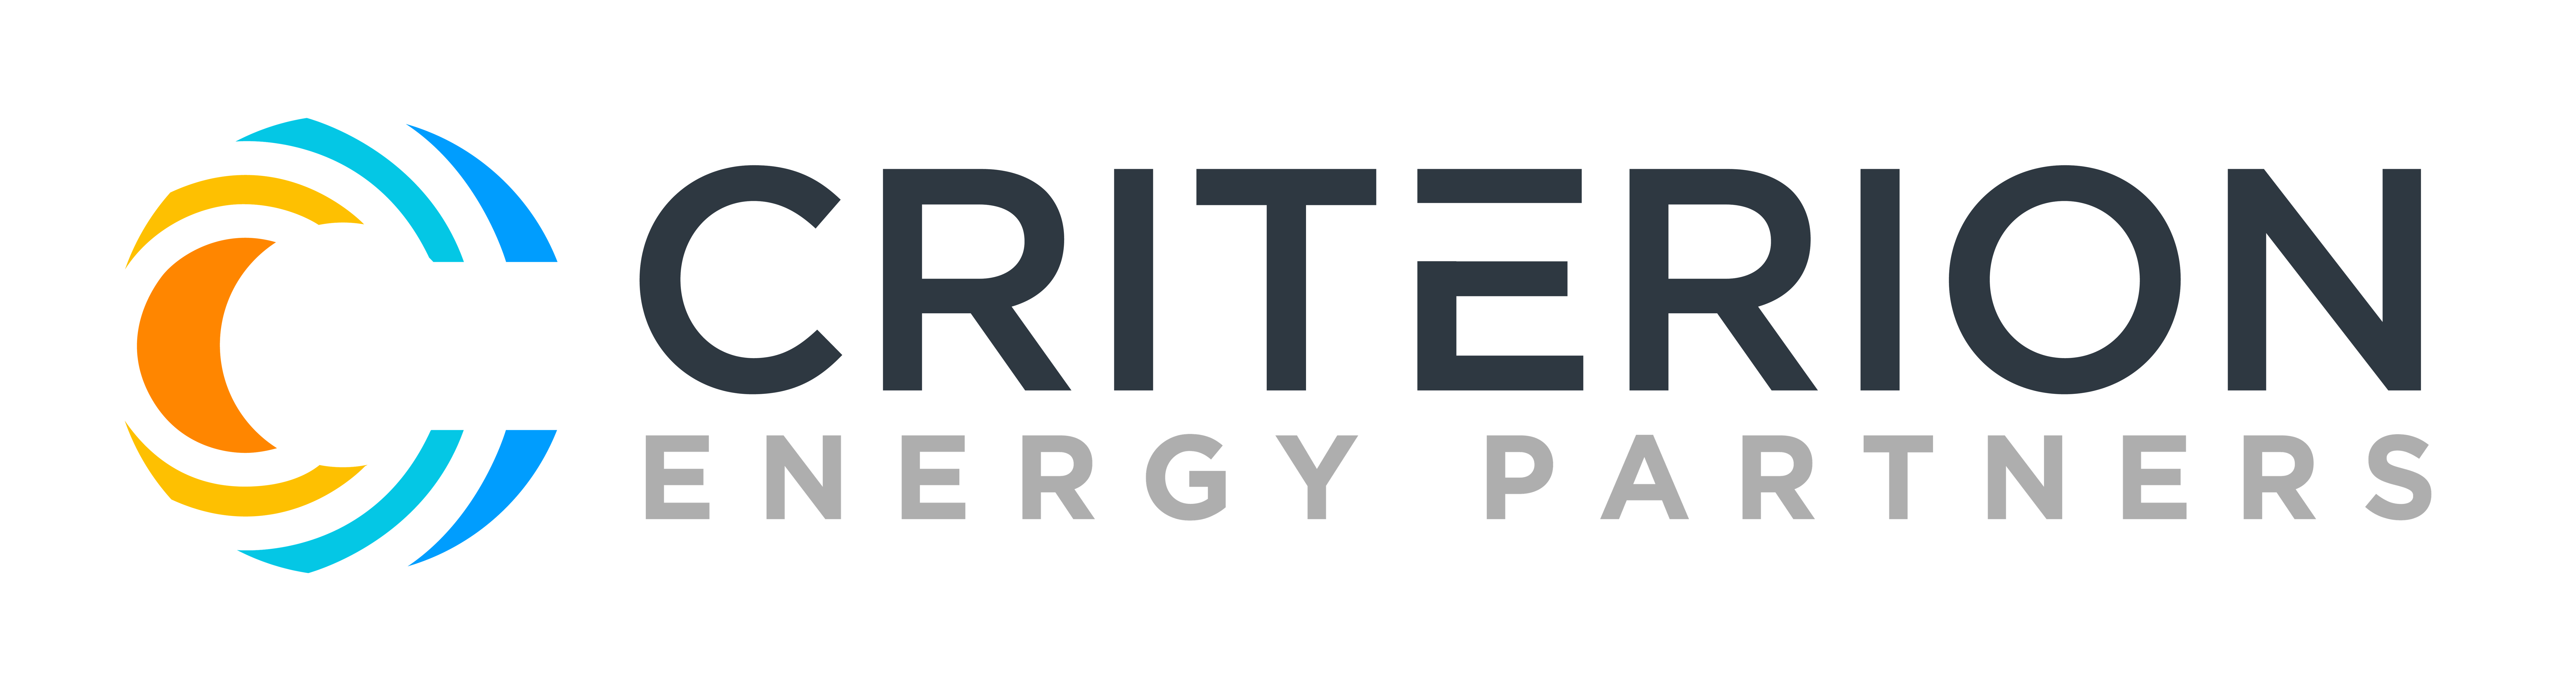 Featured Image for Criterion Energy Partners